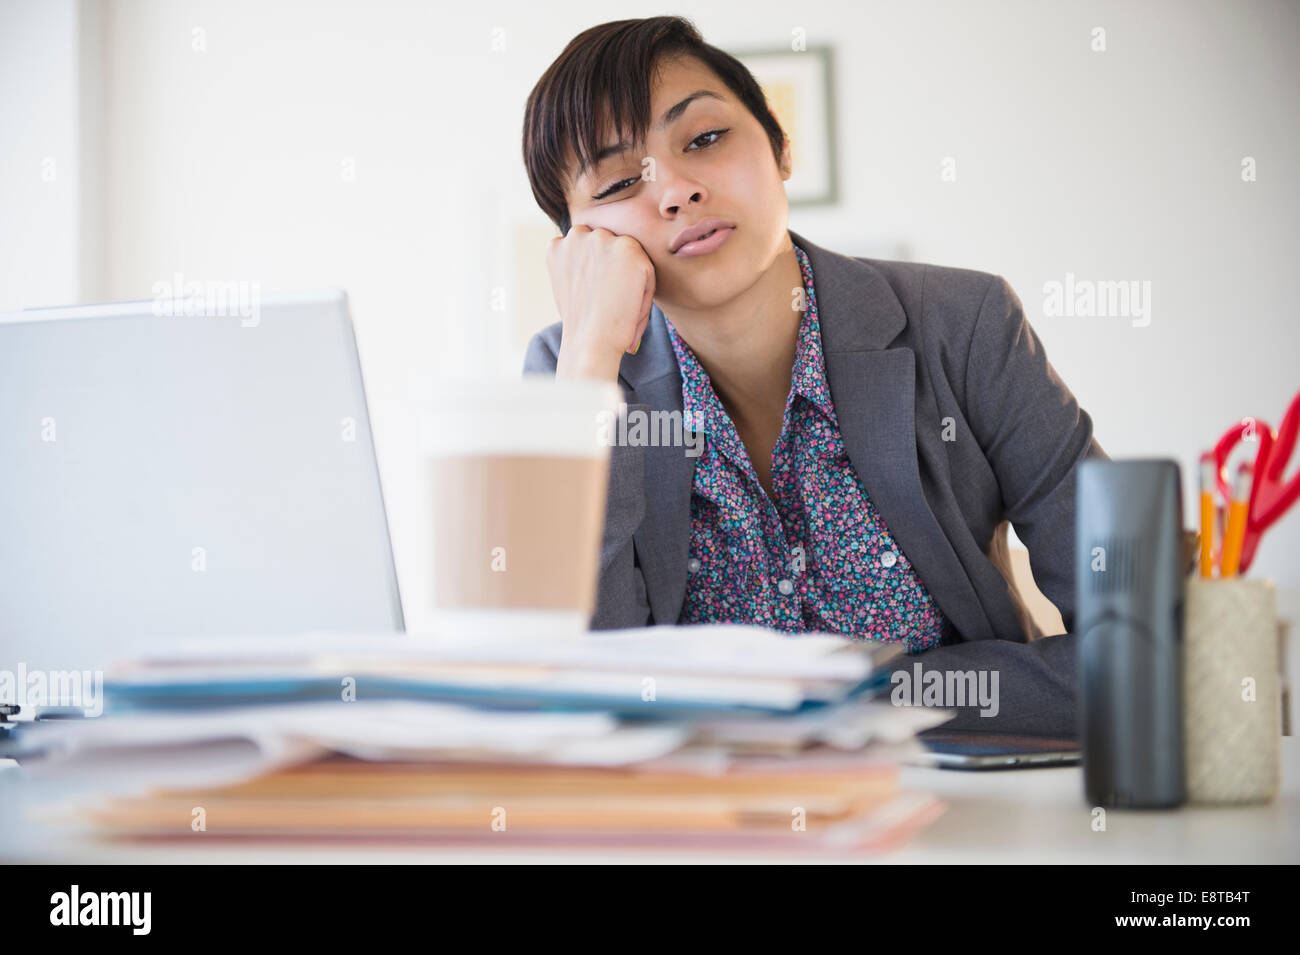 Bored hispanic businesswoman sitting at office desk Banque D'Images